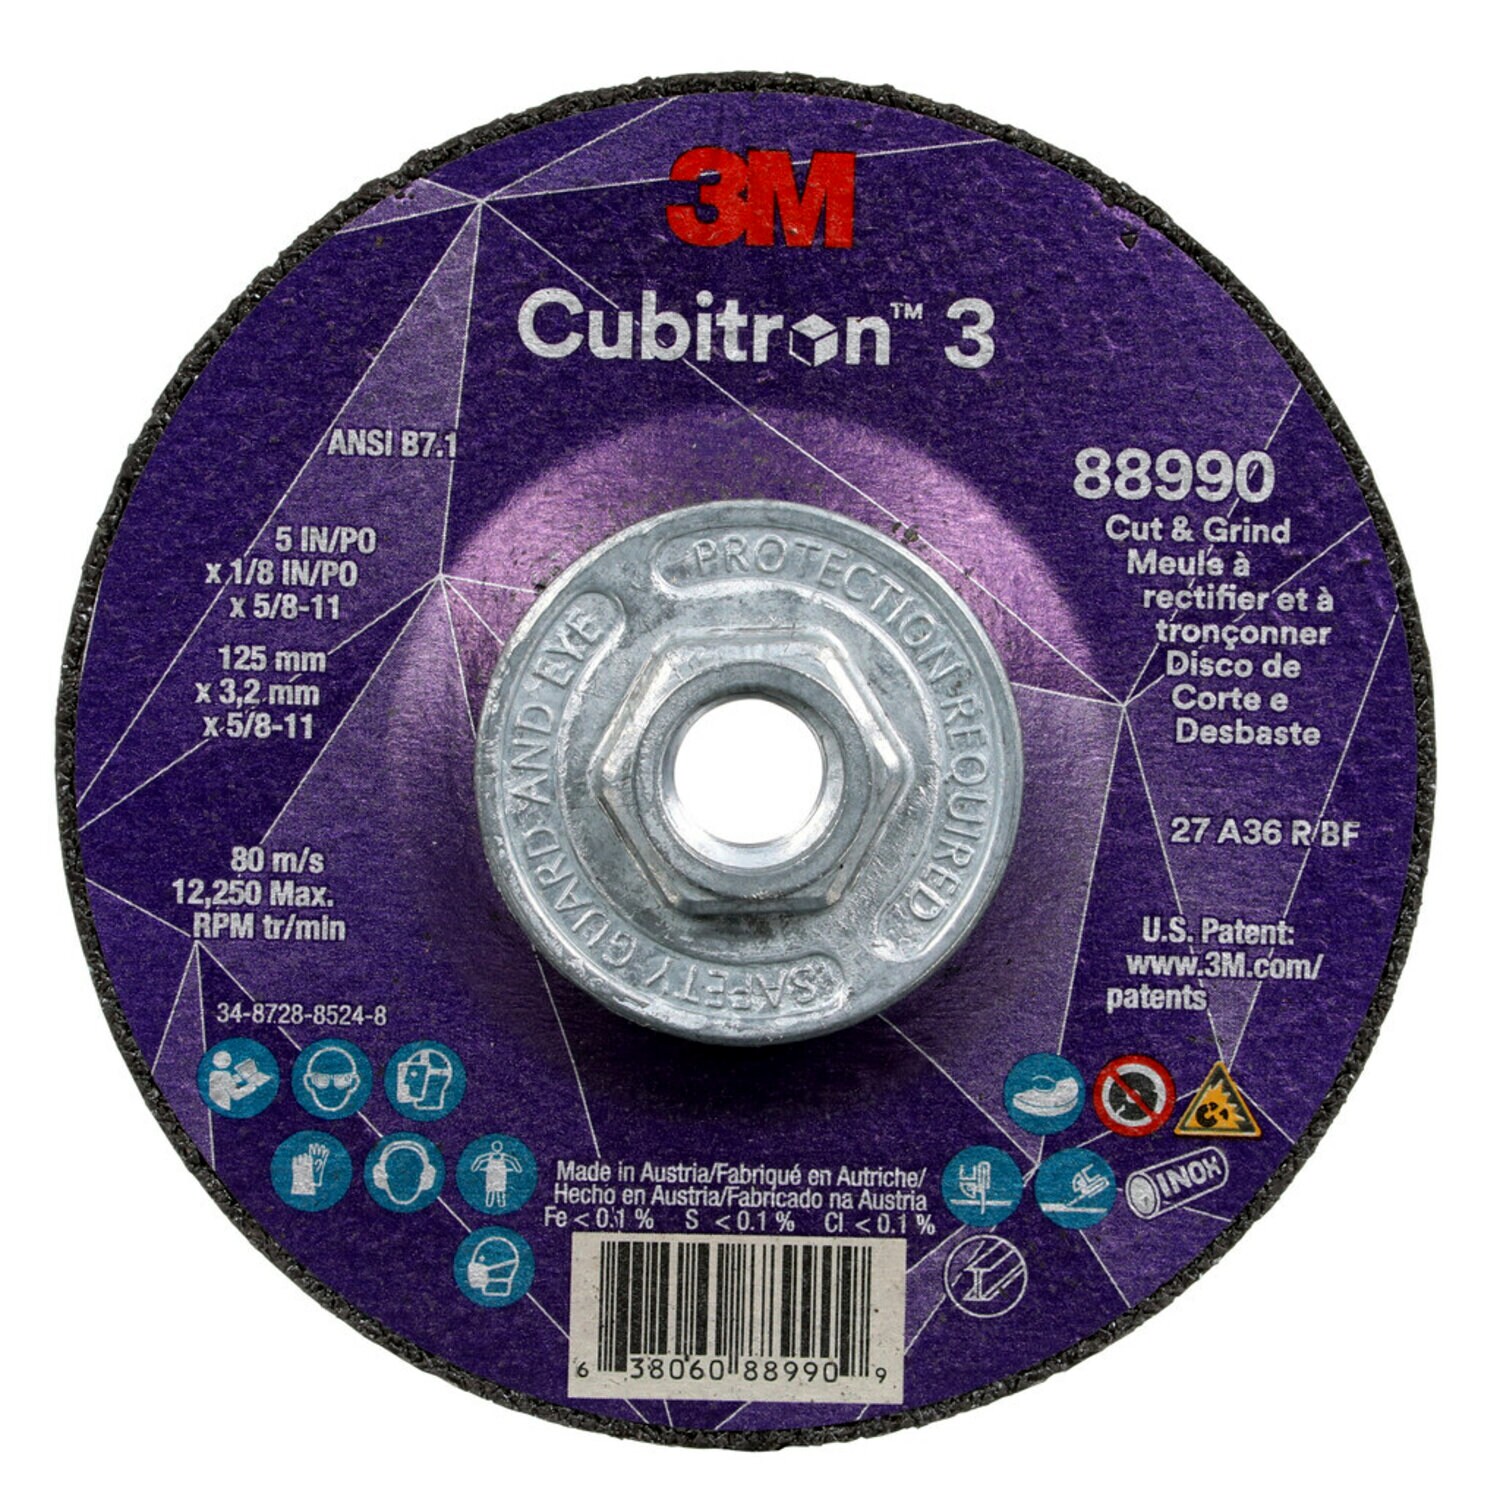 7100313204 - 3M Cubitron 3 Cut and Grind Wheel, 88990, 36+, T27, 5 in x 1/8 in x
5/8 in-11 (125 x 3.2 mm x 5/8-11 in), ANSI, 10 ea/Case